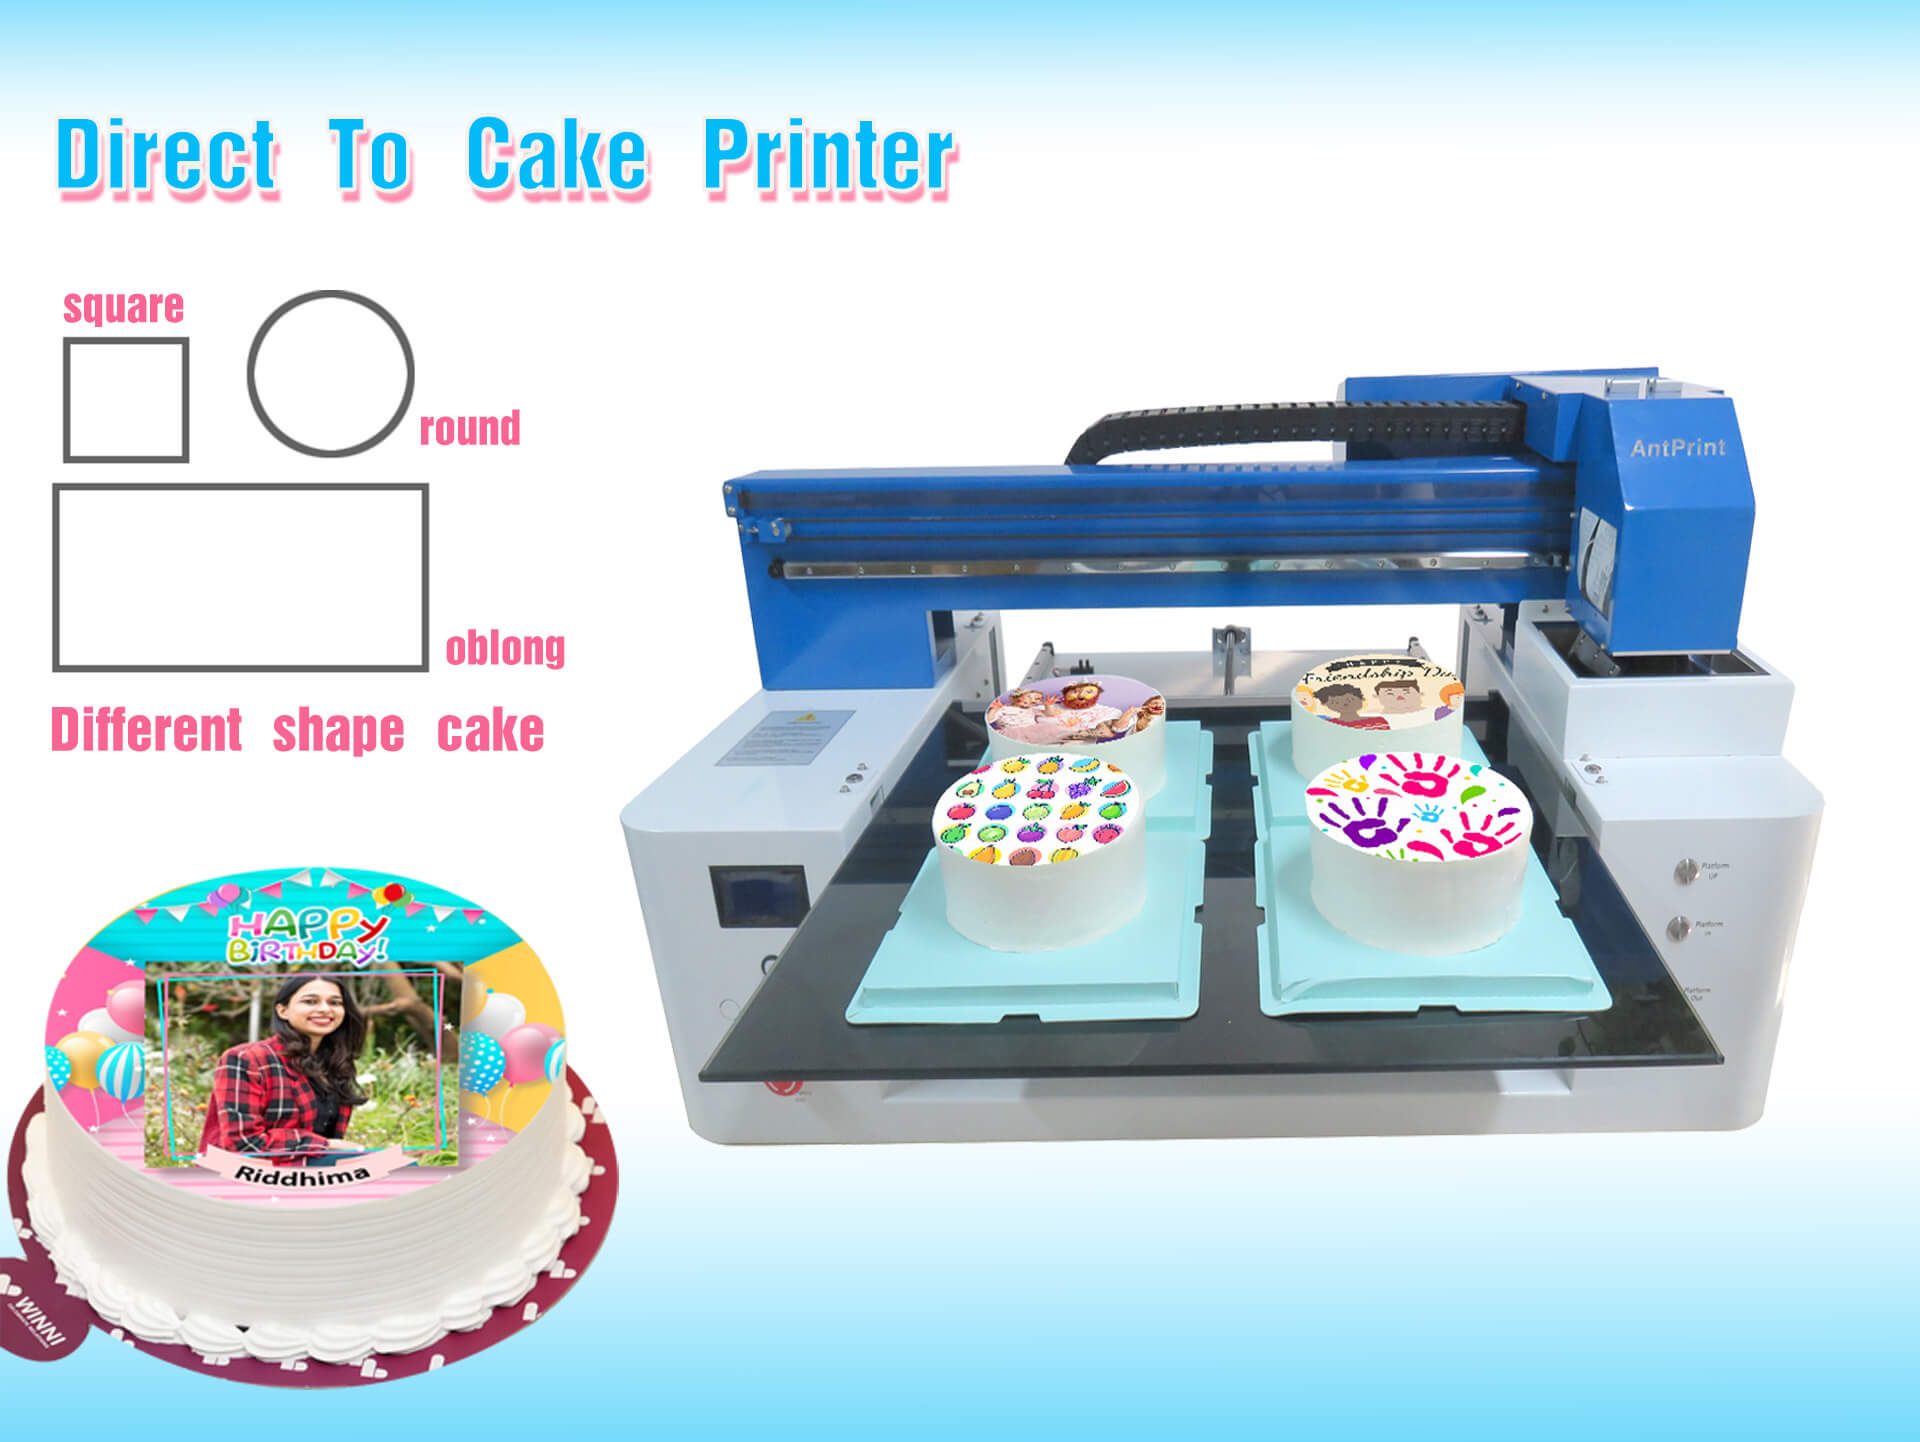 Buy Cake Coating Machine (18 CM) Online at Low Prices in India - Amazon.in